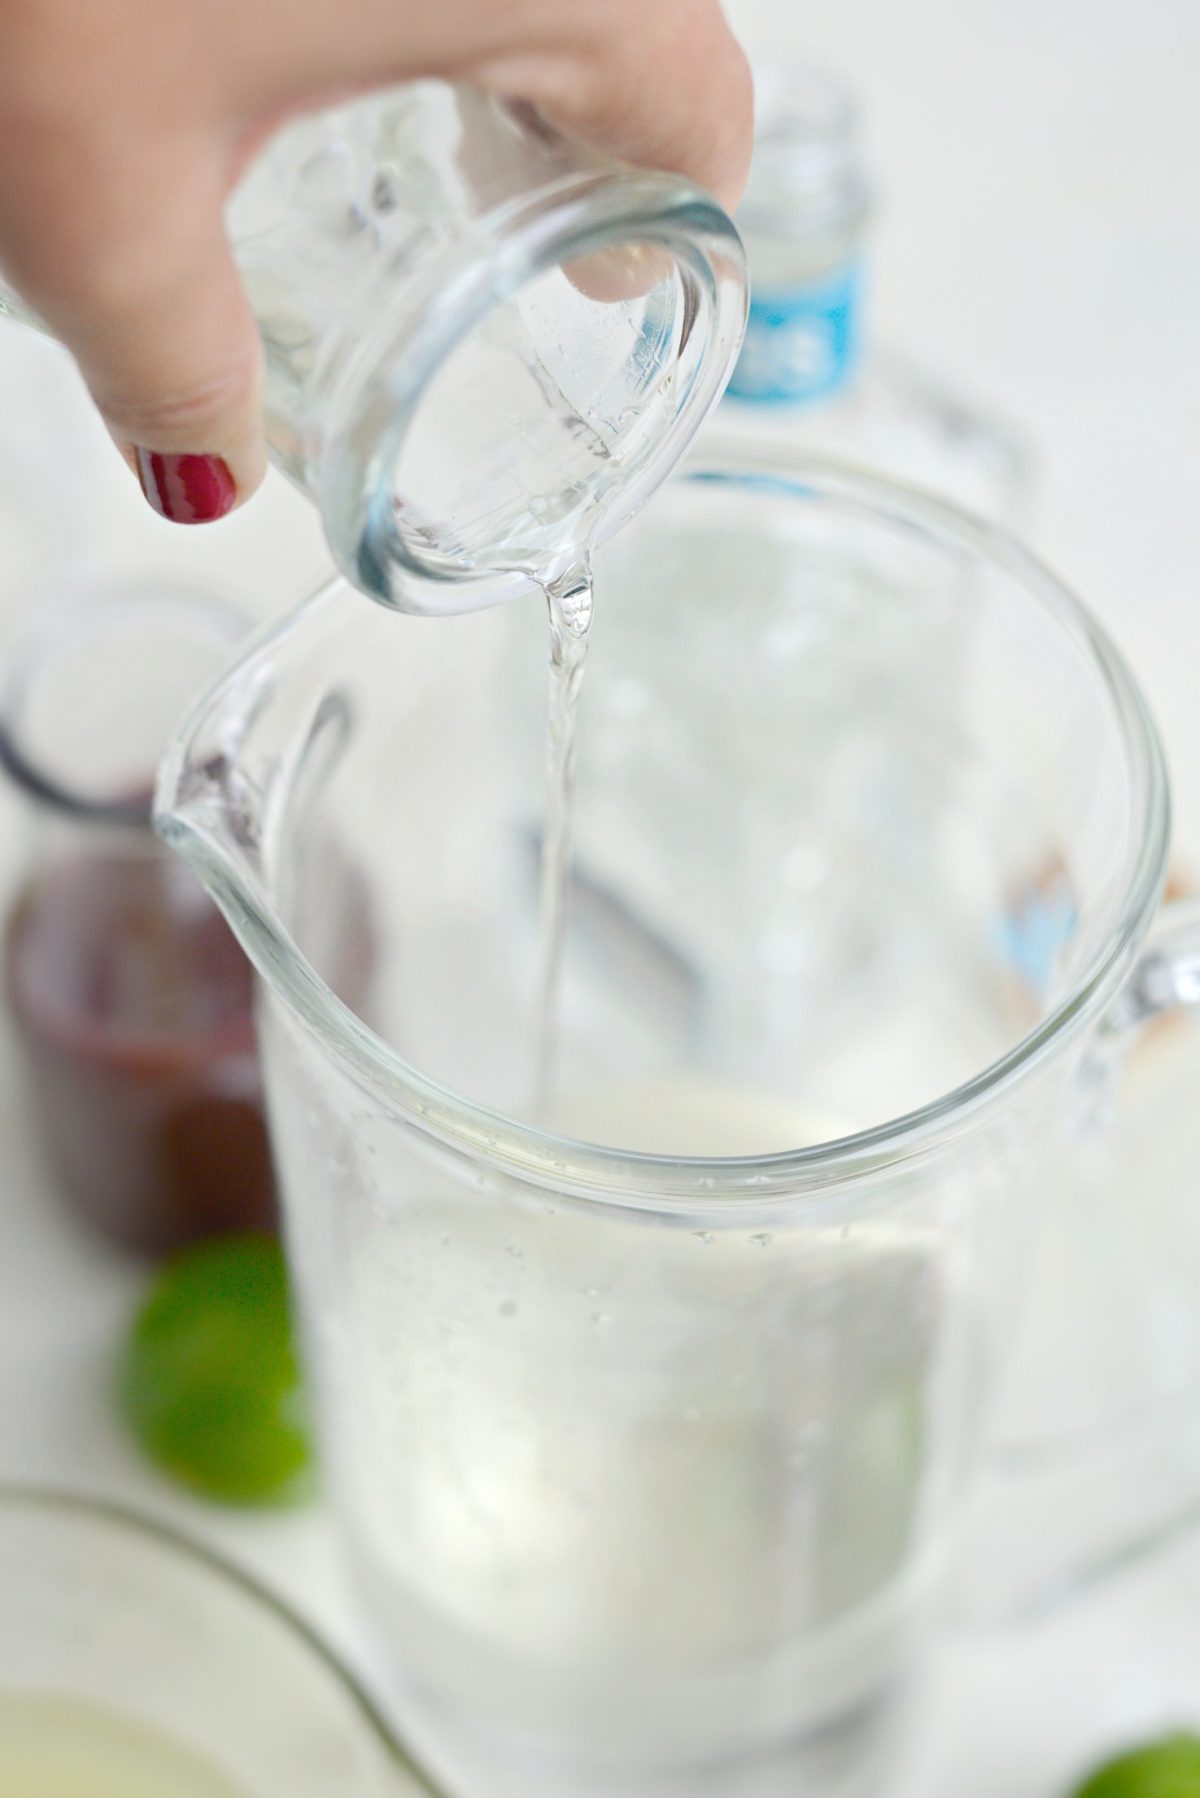 pour in lime juice